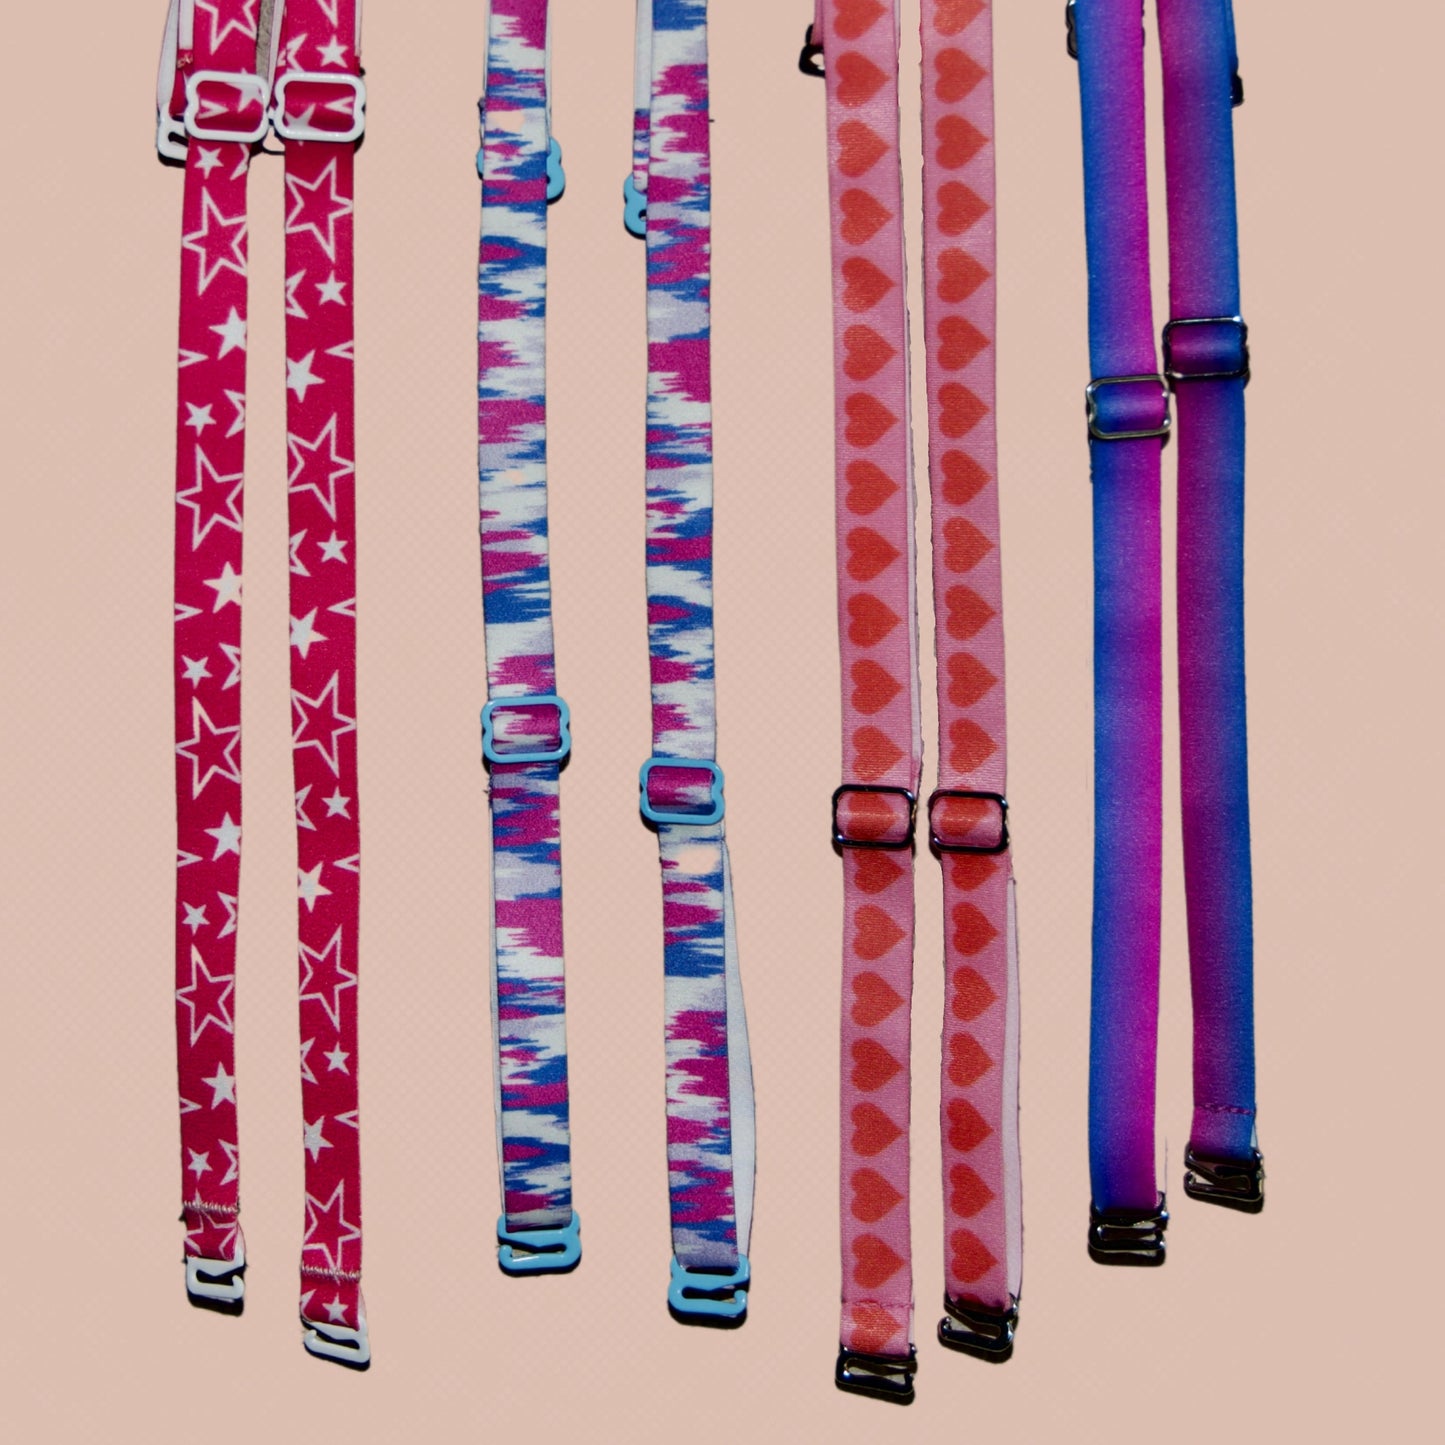 4 sets of Her-Rah interchangeable bra straps. From Left to right: Twinkle Her-Rah Straps - Hot Pink straps with a mix of solid white and outlined stars in varied sizes, featuring white coated hardware. 3-D Static - White straps with fading static/sound wave shapes in hot pink, gray, and blue, featuring blue coated hardware. Hearts - pink straps with red hearts repeating the length of the strap, featuring silver metal hardware.